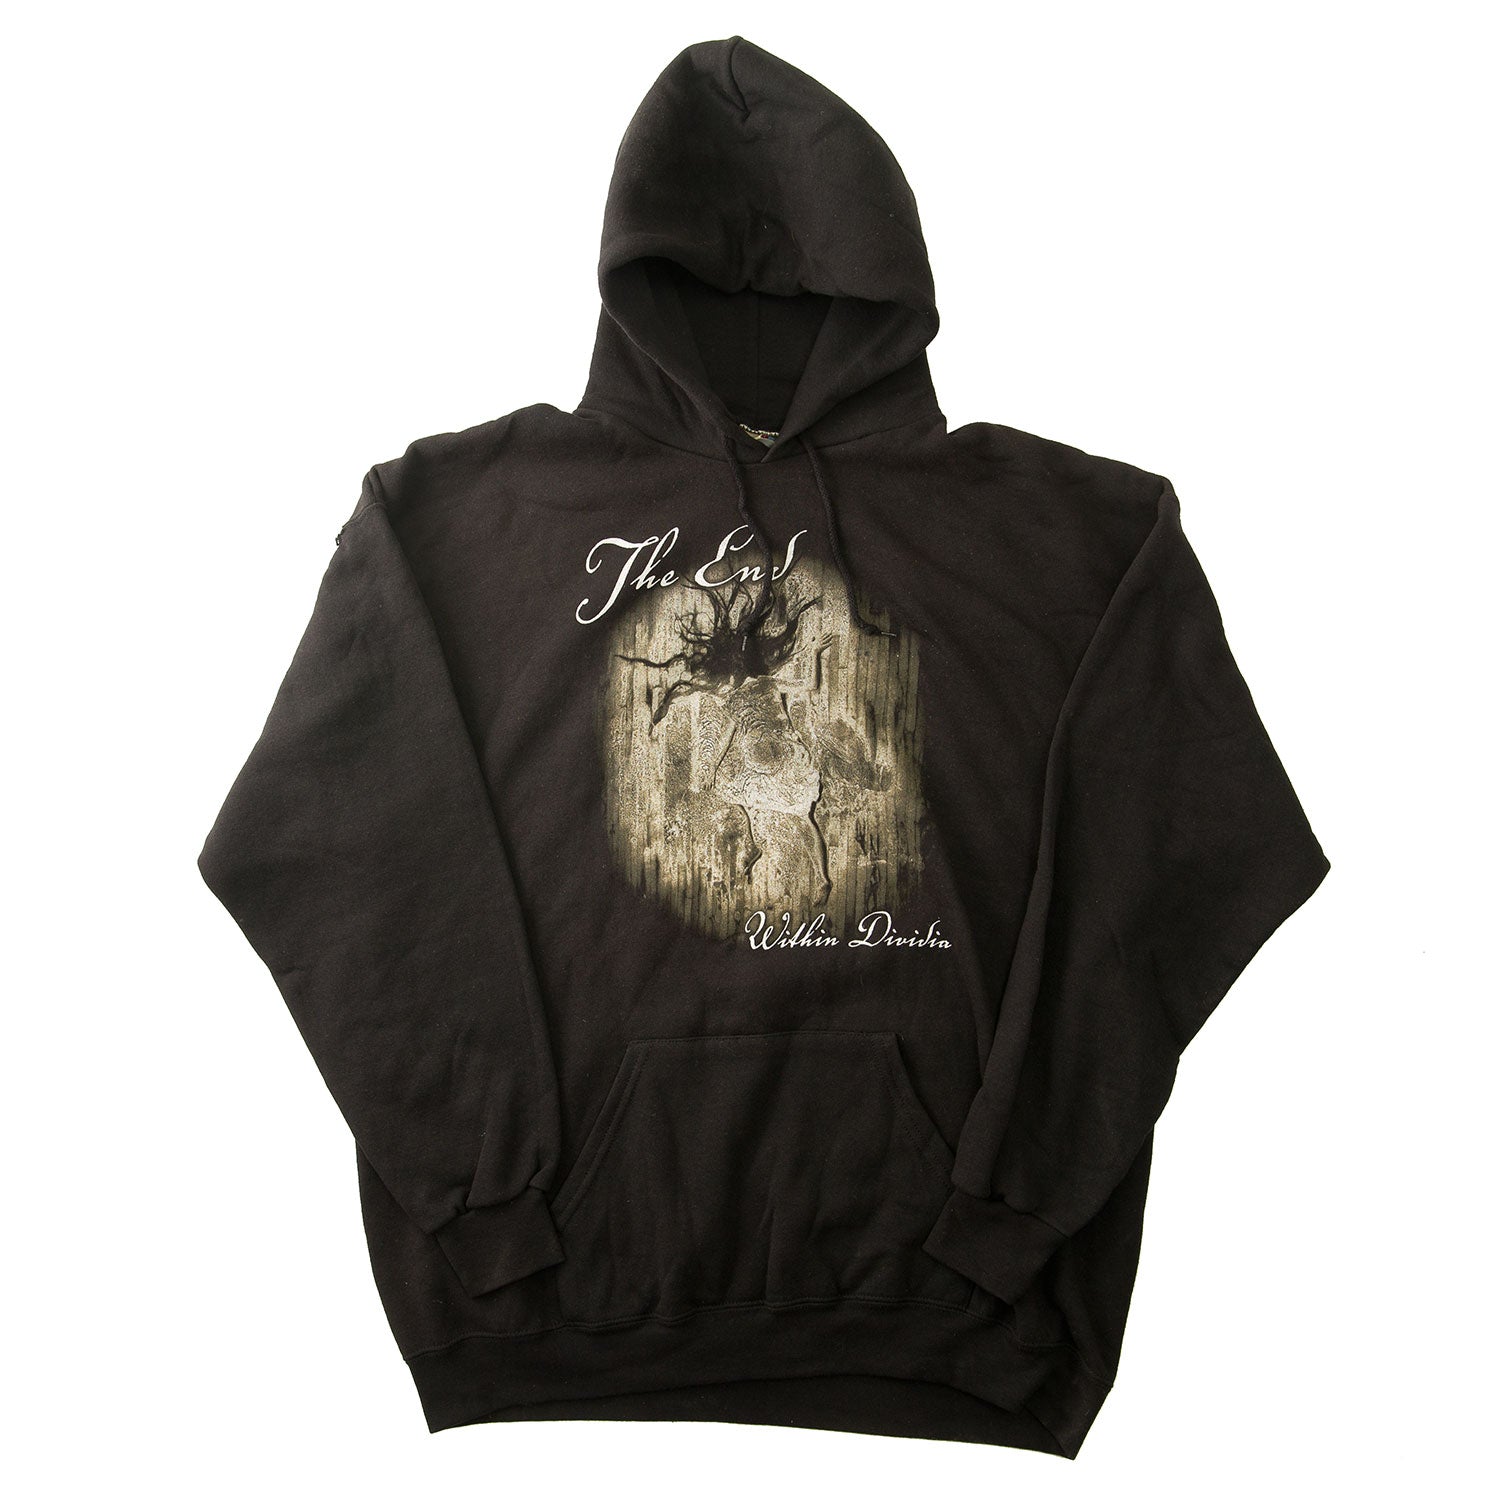 The End "Within Dividia" Pullover Hoodie